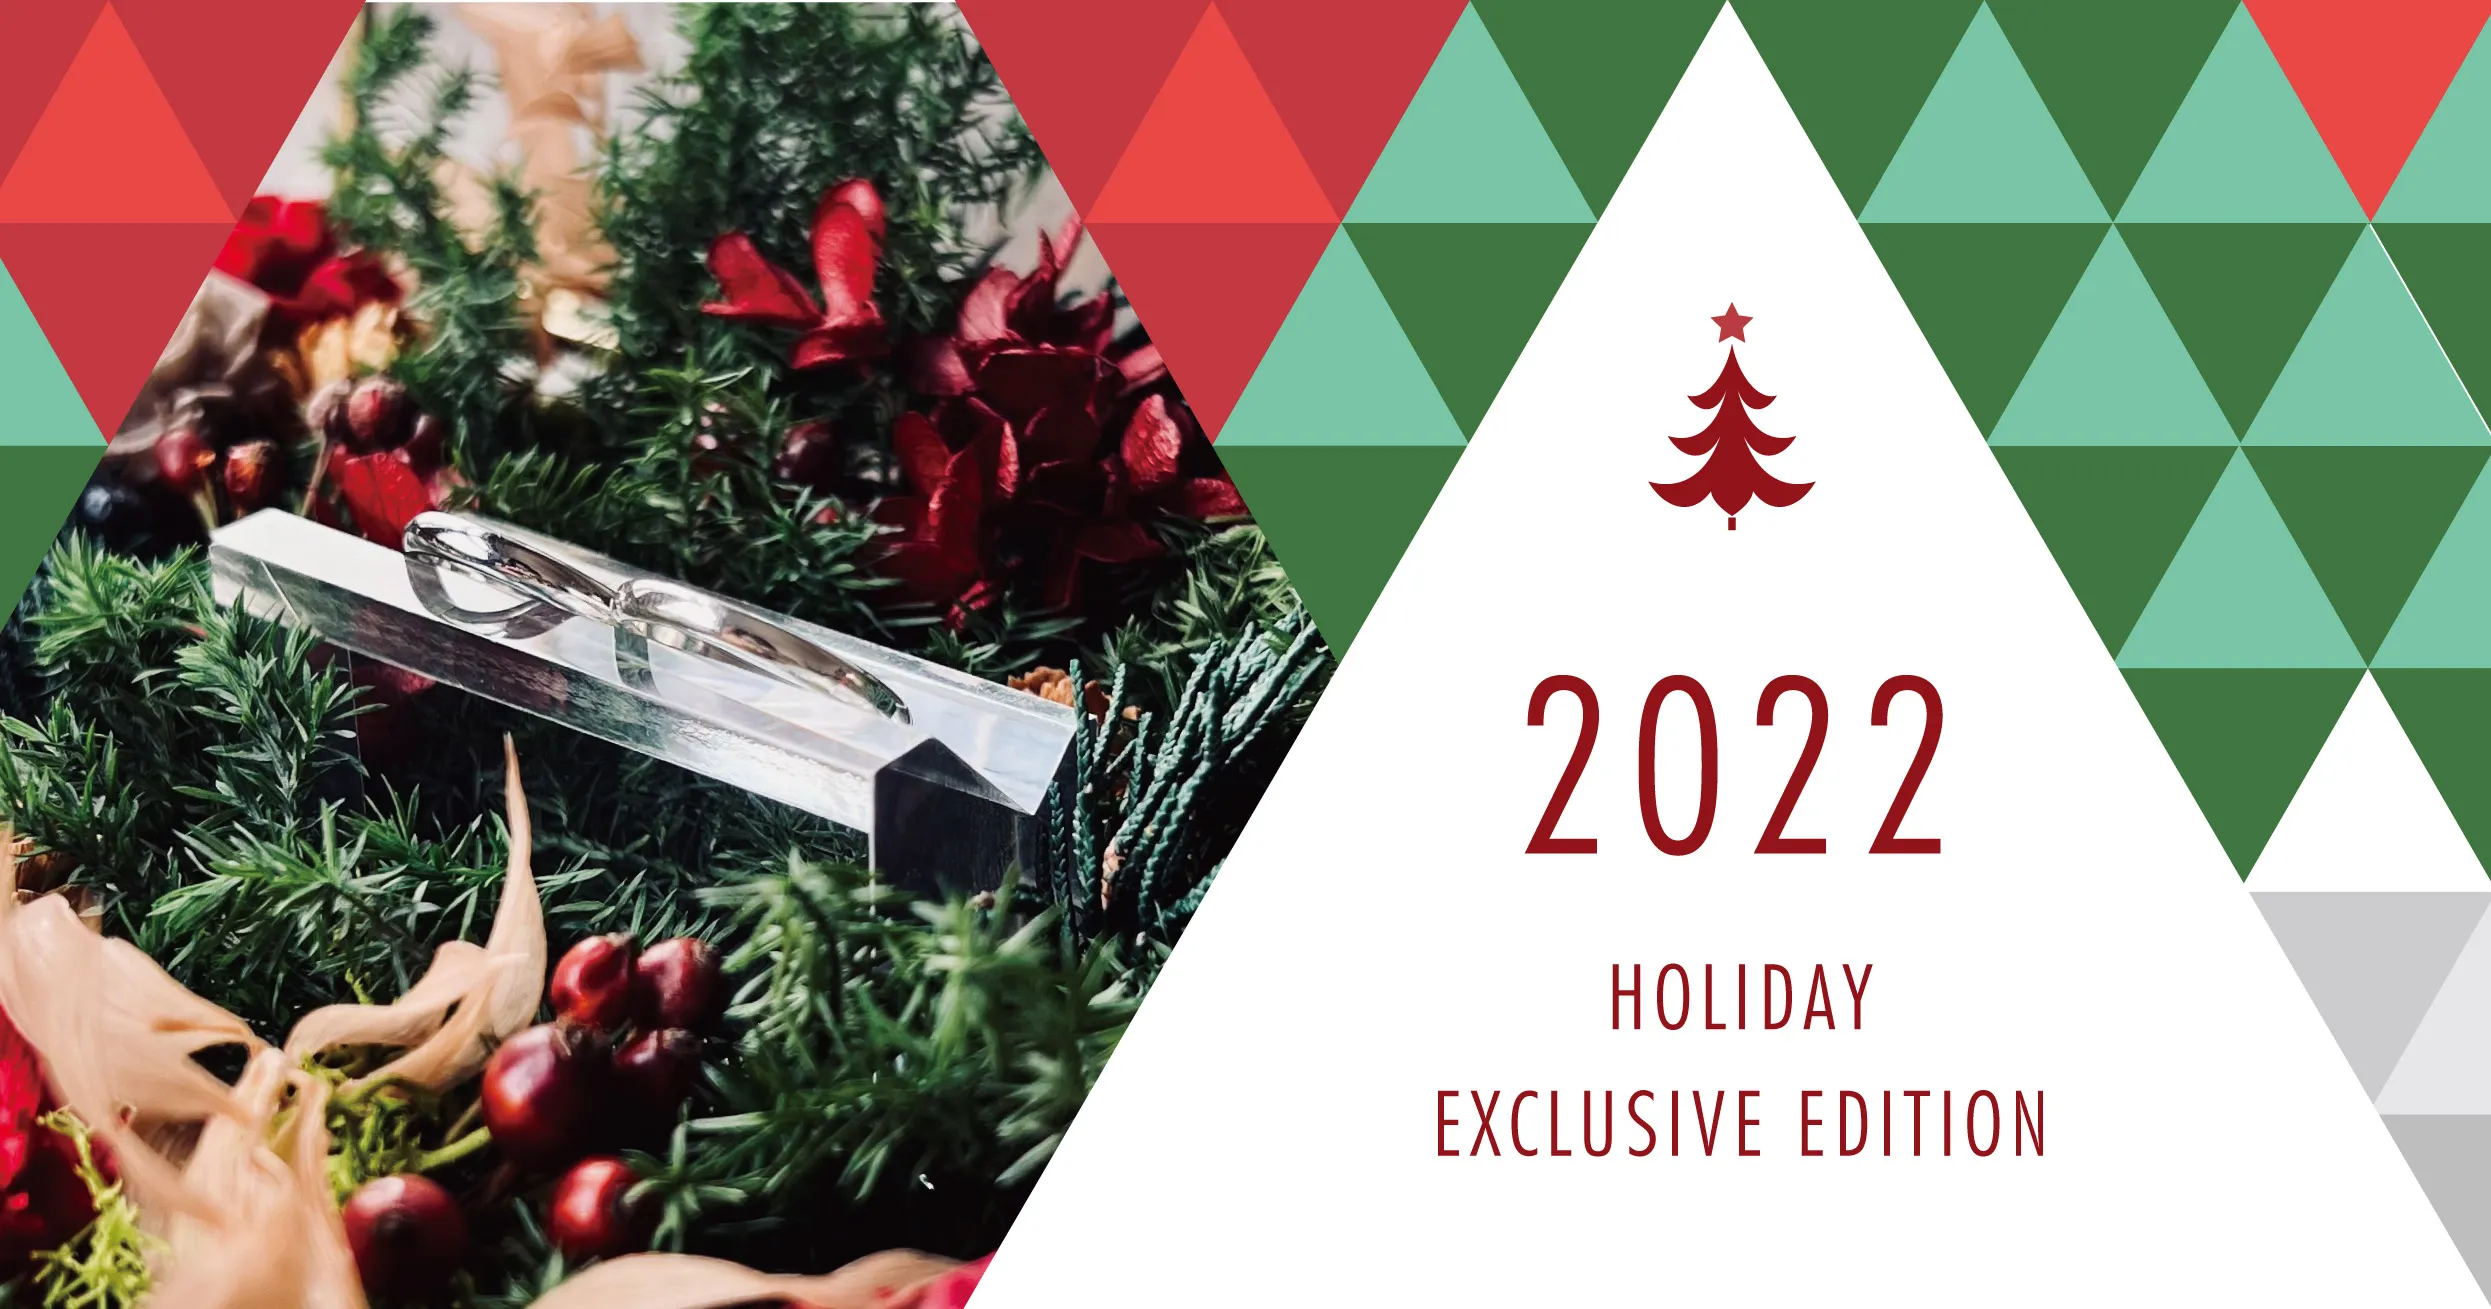 2022〈Holiday Exclusive Edition〉